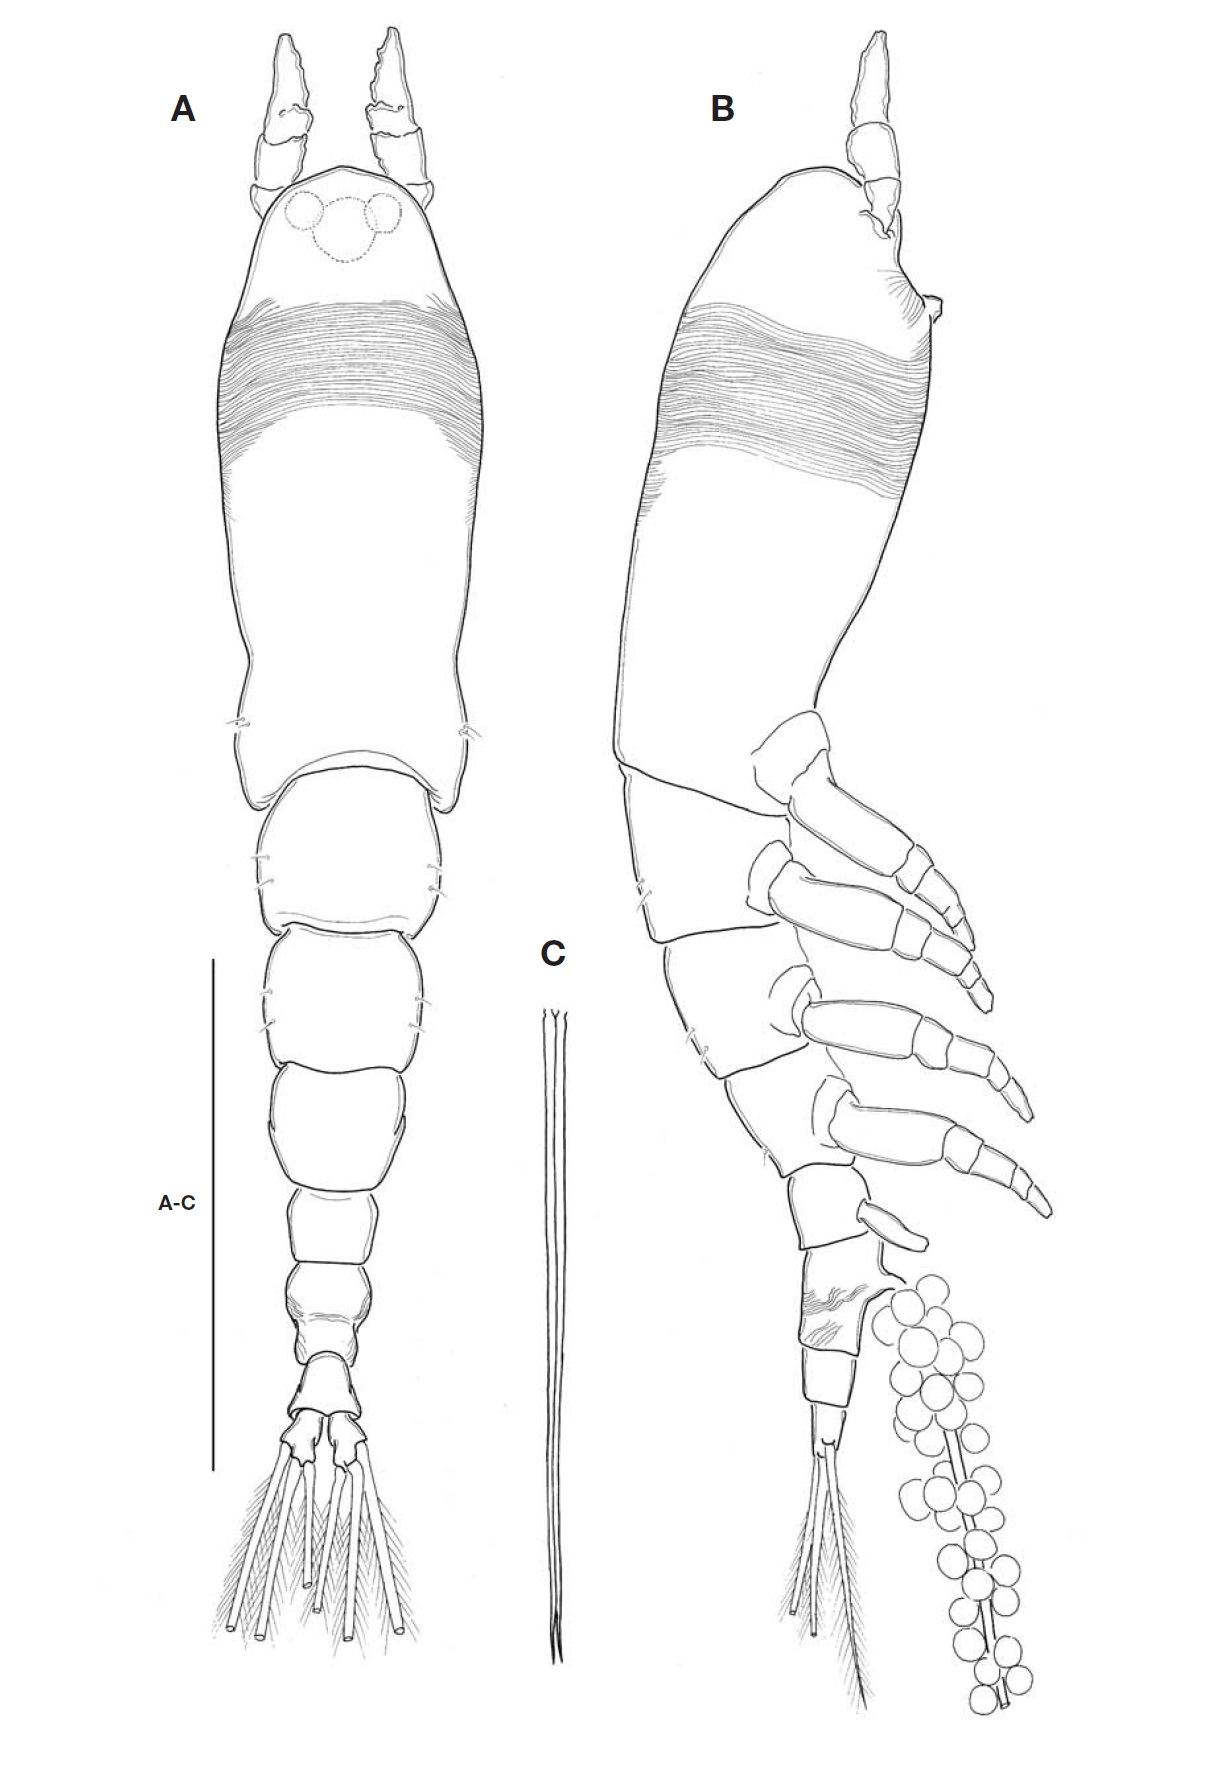 Cymbasoma striifrons n. sp. female. A Habitus dorsal; B Habitus lateral; C Ovigerous spines. Scale bar: A-C=500 ㎛.